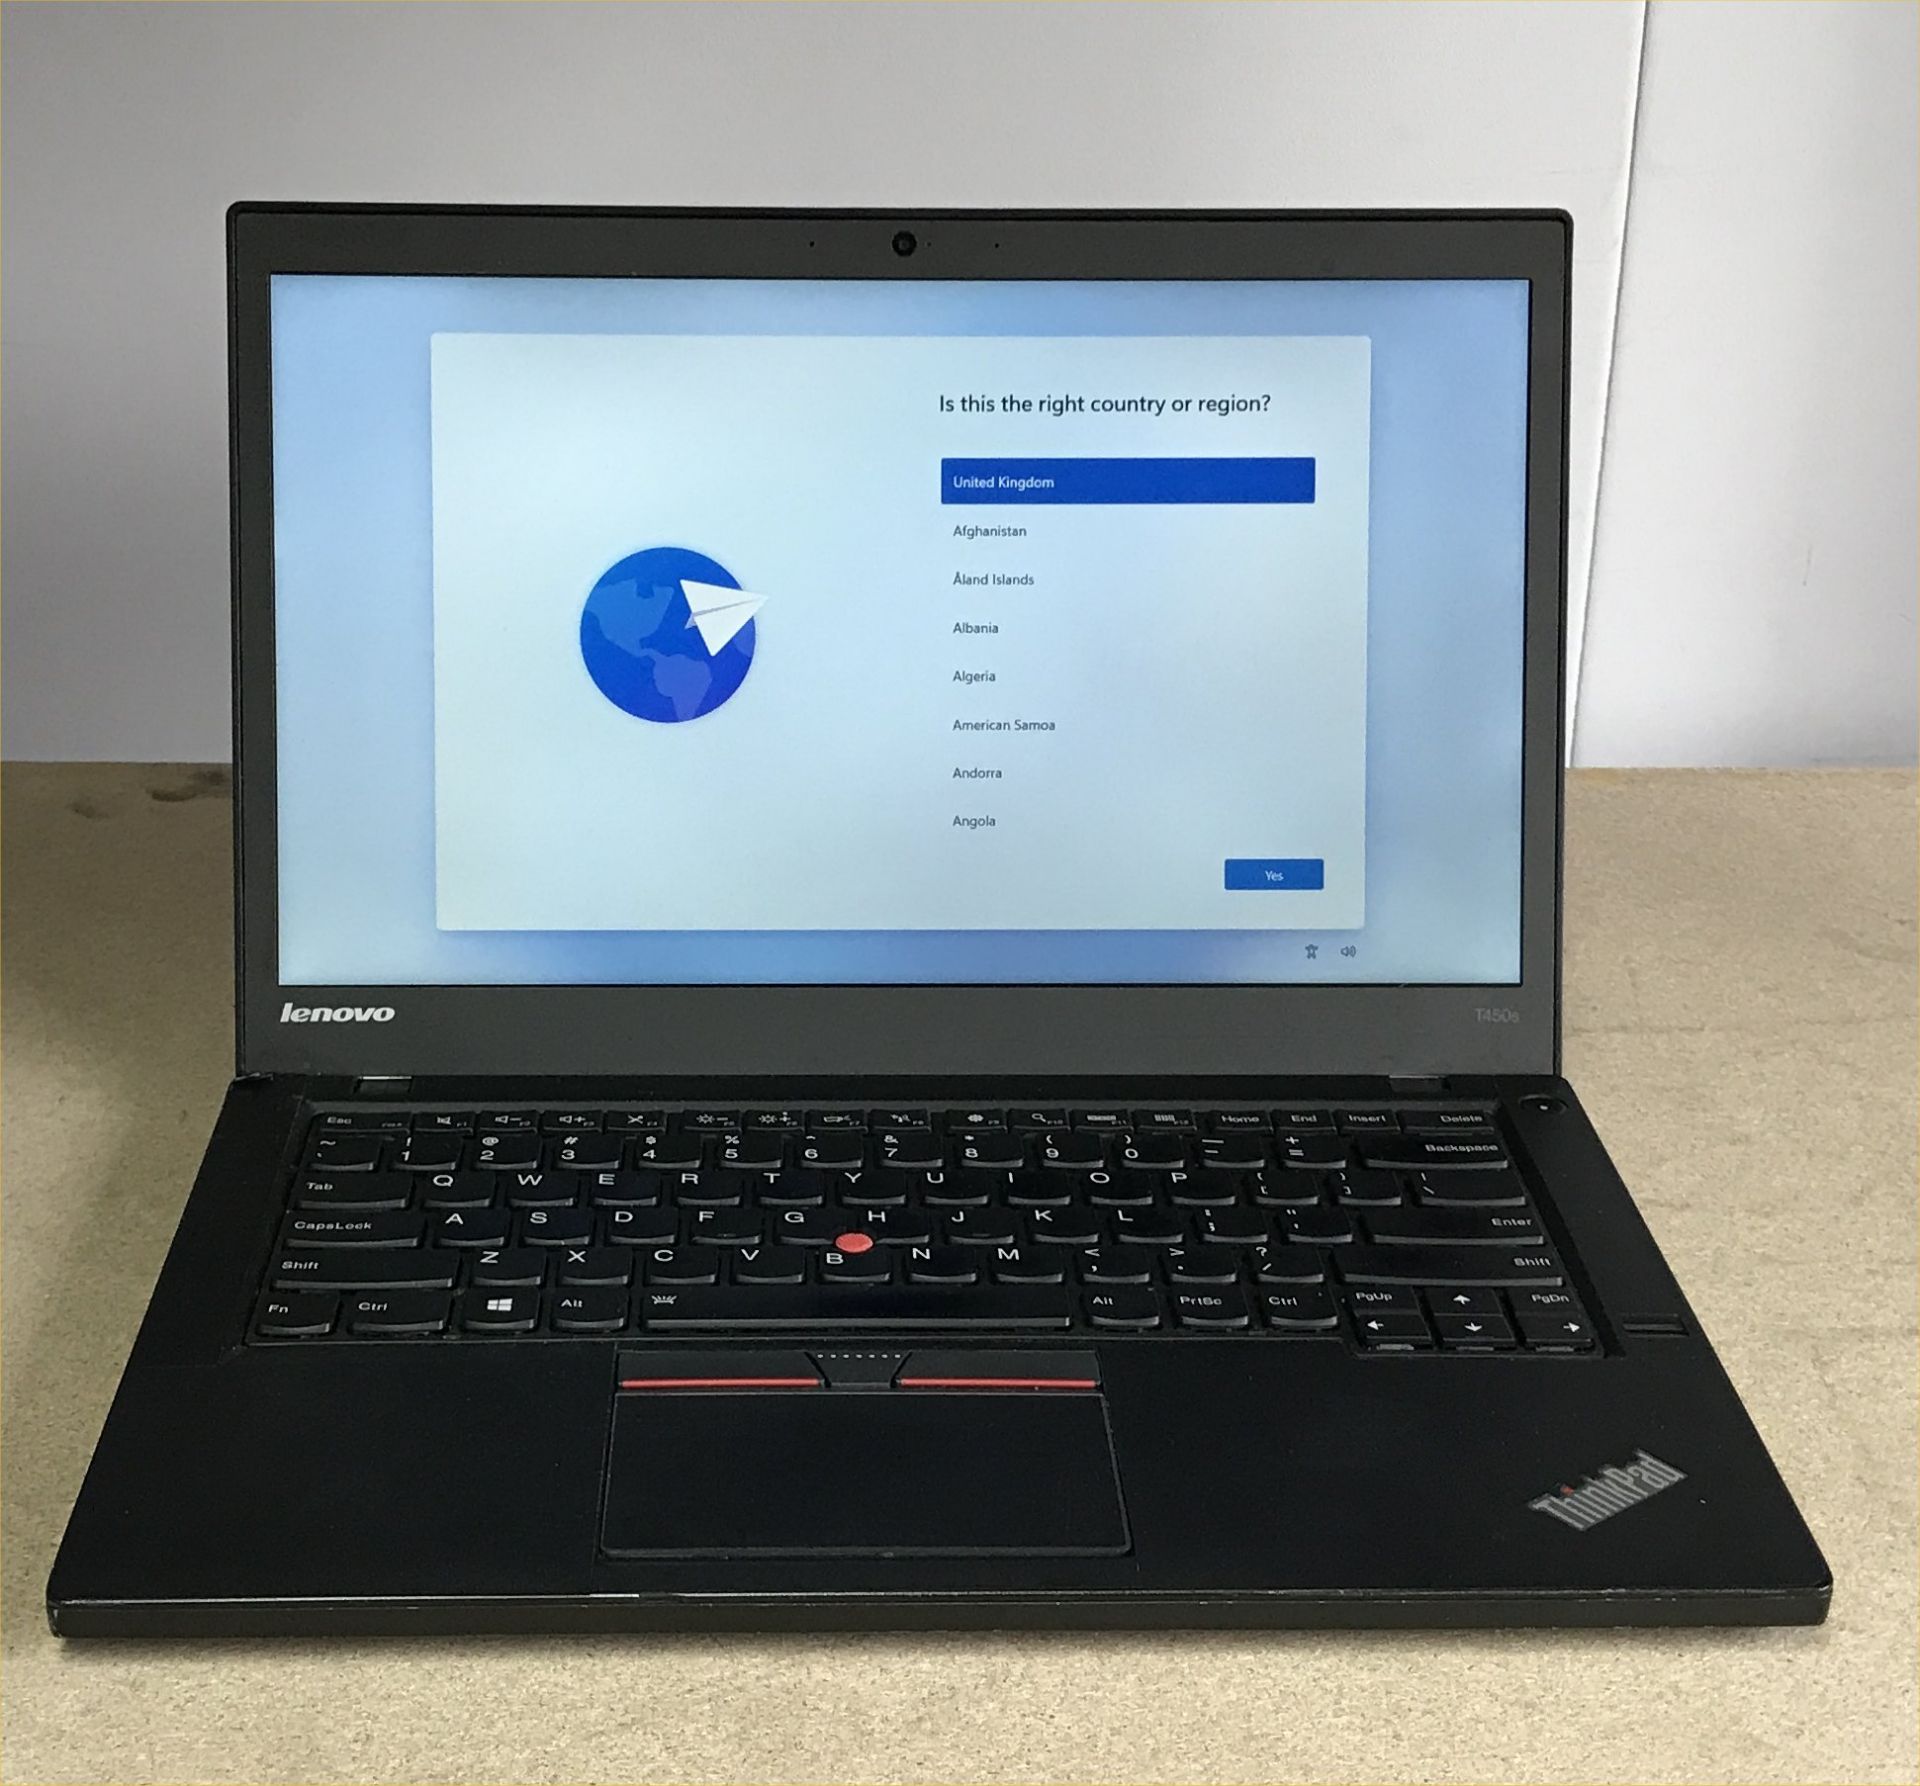 LENOVO T450S LAPTOP - INTEL Is-5300 CPU, 8GB RAM, 128GB SSD (N0 CHARGER) - DATA WIPED & WINDOWS 11